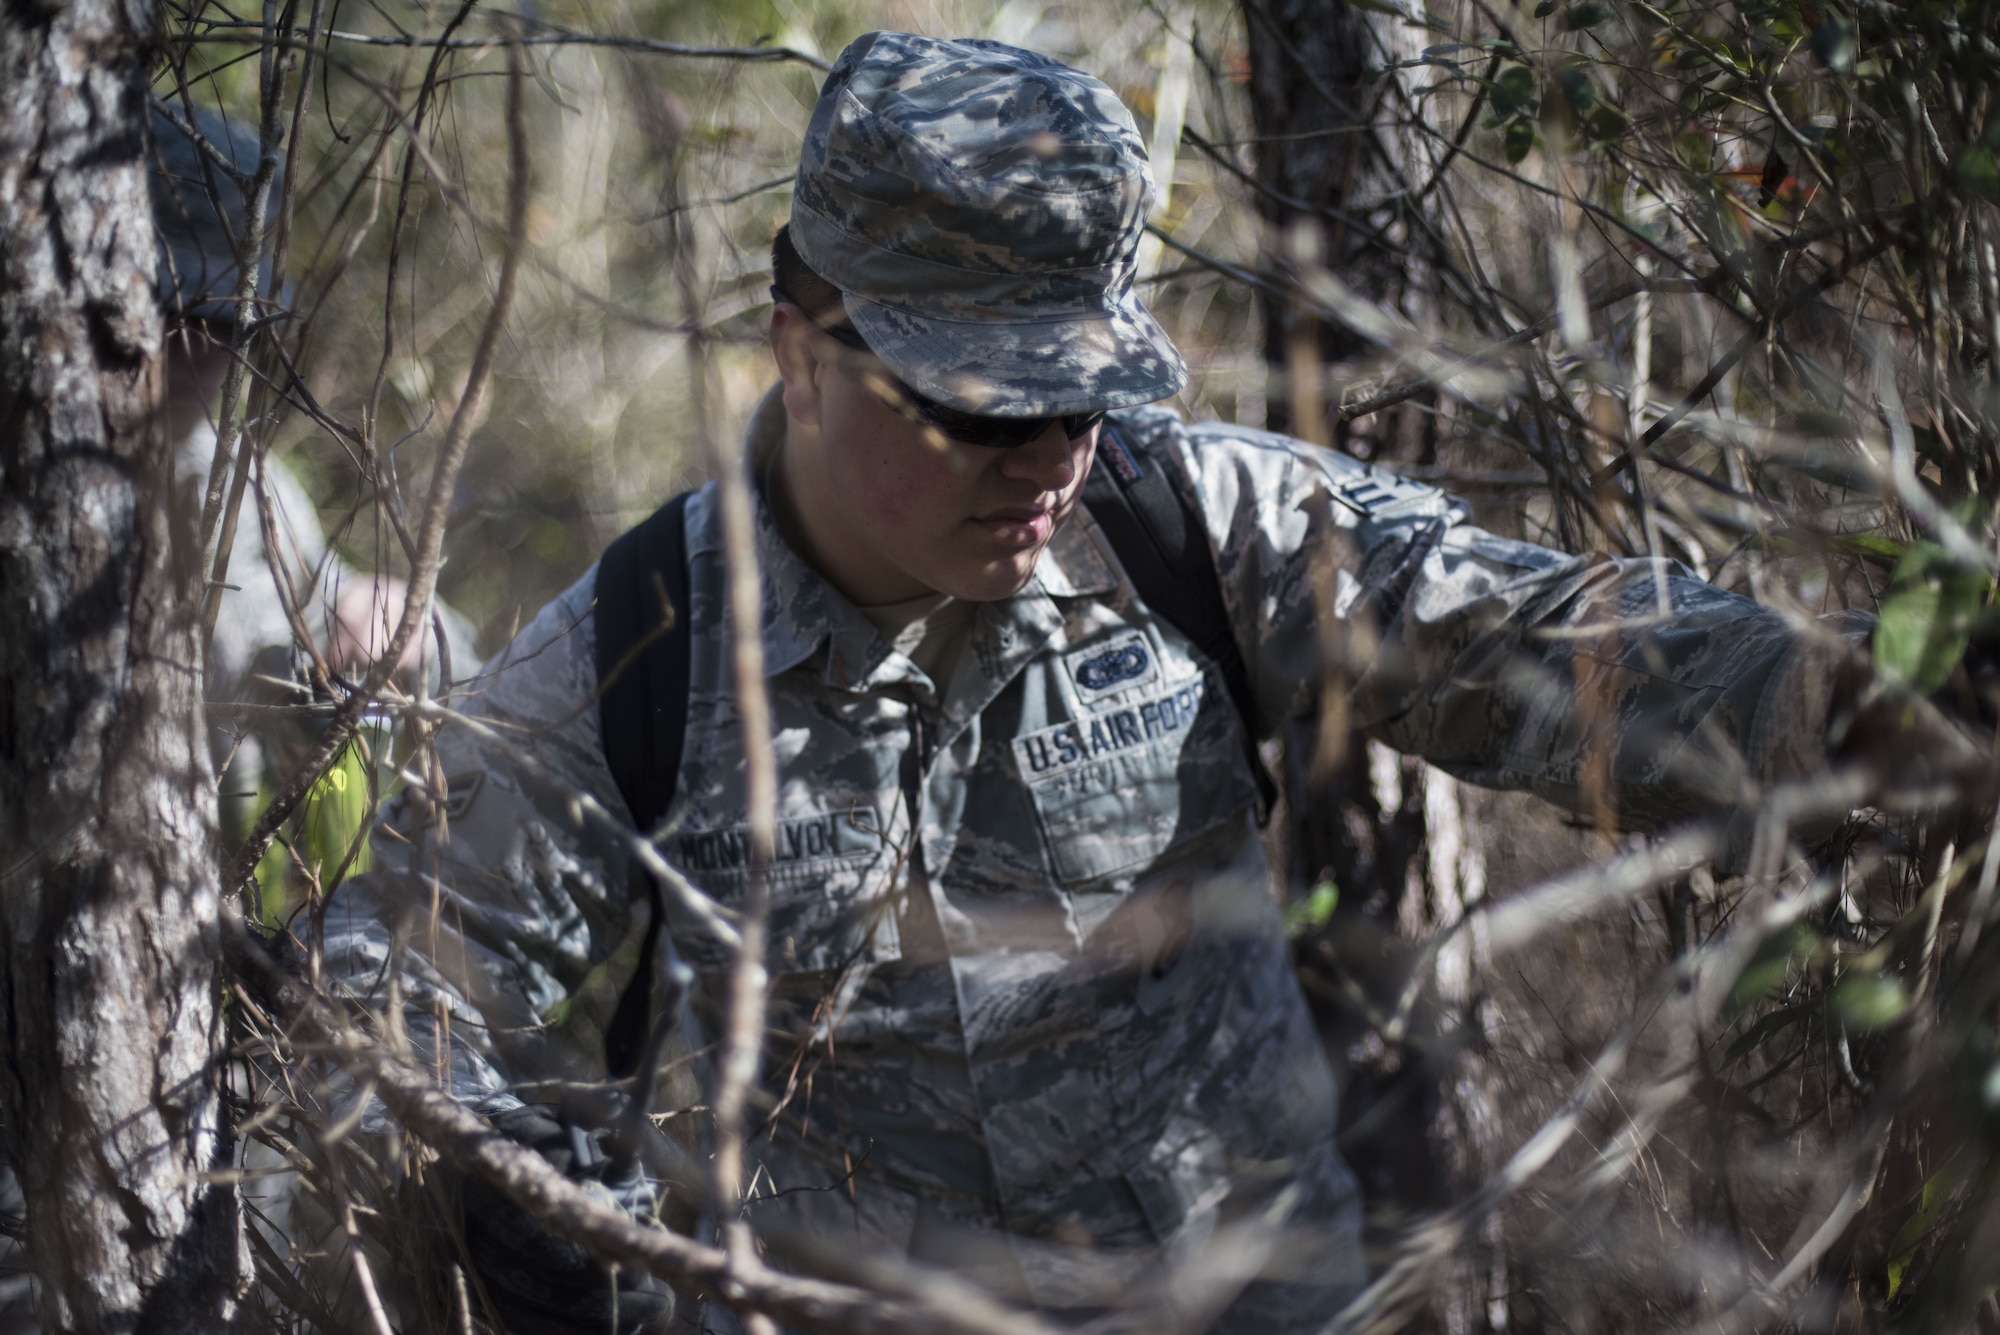 Airman 1st Class Anthony Montalvo, 824th Base Defense Squadron fireteam member, traverses through the woods while scanning for signs of an improvised explosive device (IED) during training, Jan. 24, 2018, at Moody Air Force Base, Ga. The 820th Base Defense Group defenders trained on how to detect IEDs and counter measures to take when one is found. IEDs have become one of the most common forms of attack in the Middle East since 2003. (U.S. Air Force photos by Staff Sgt. Eric Summers Jr.)